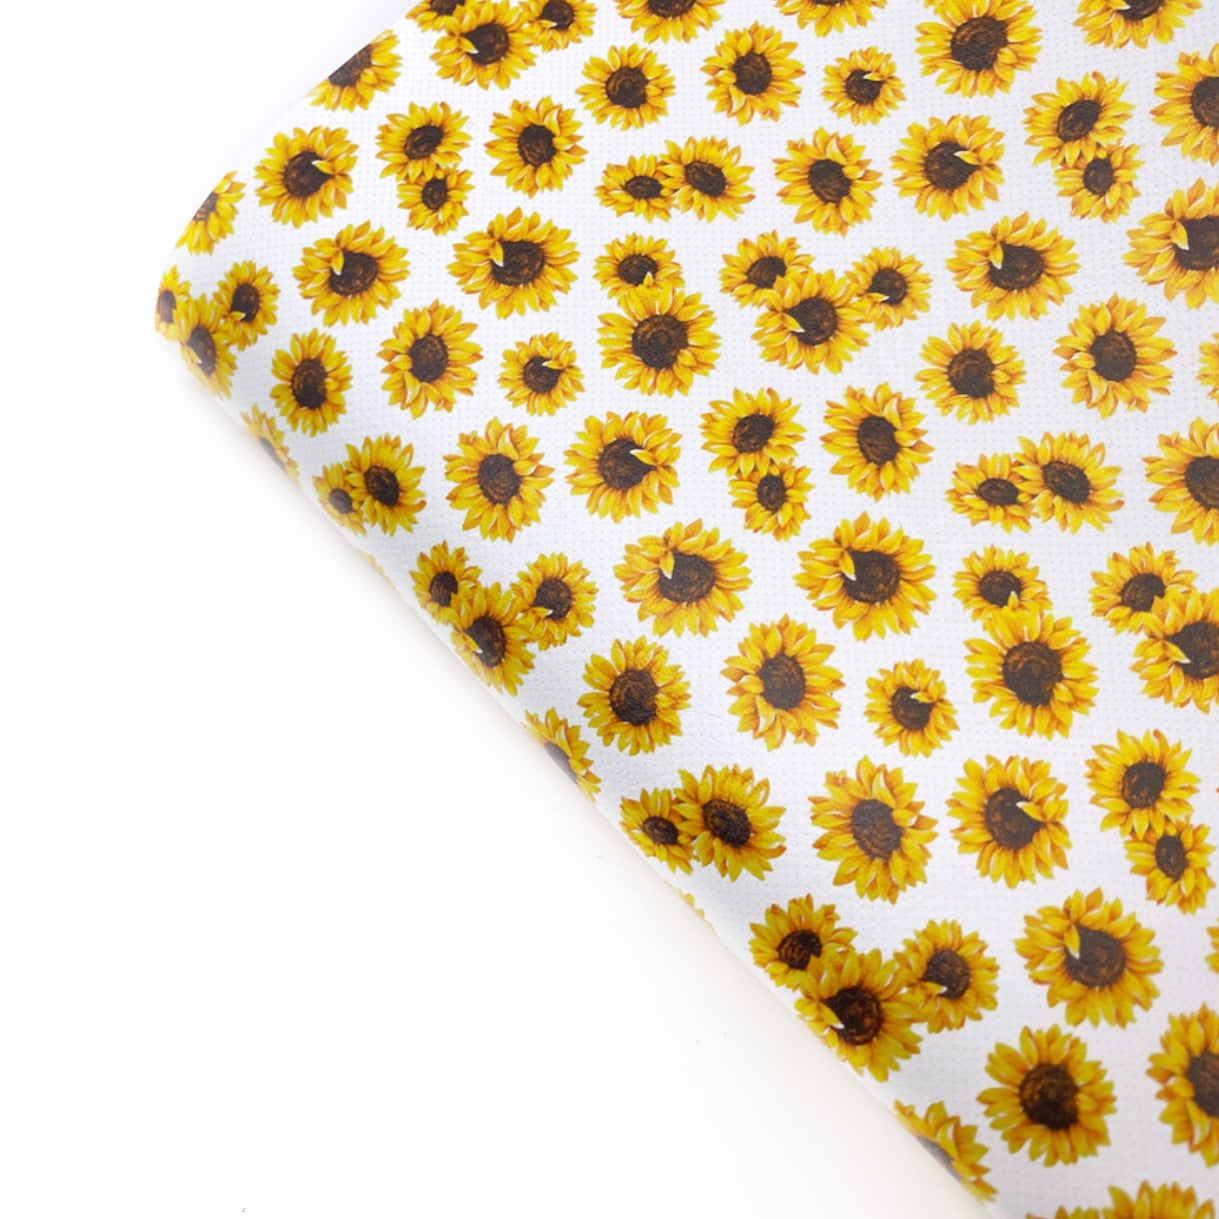 Darling Sunflower Premium Faux Leather Fabric Sheets